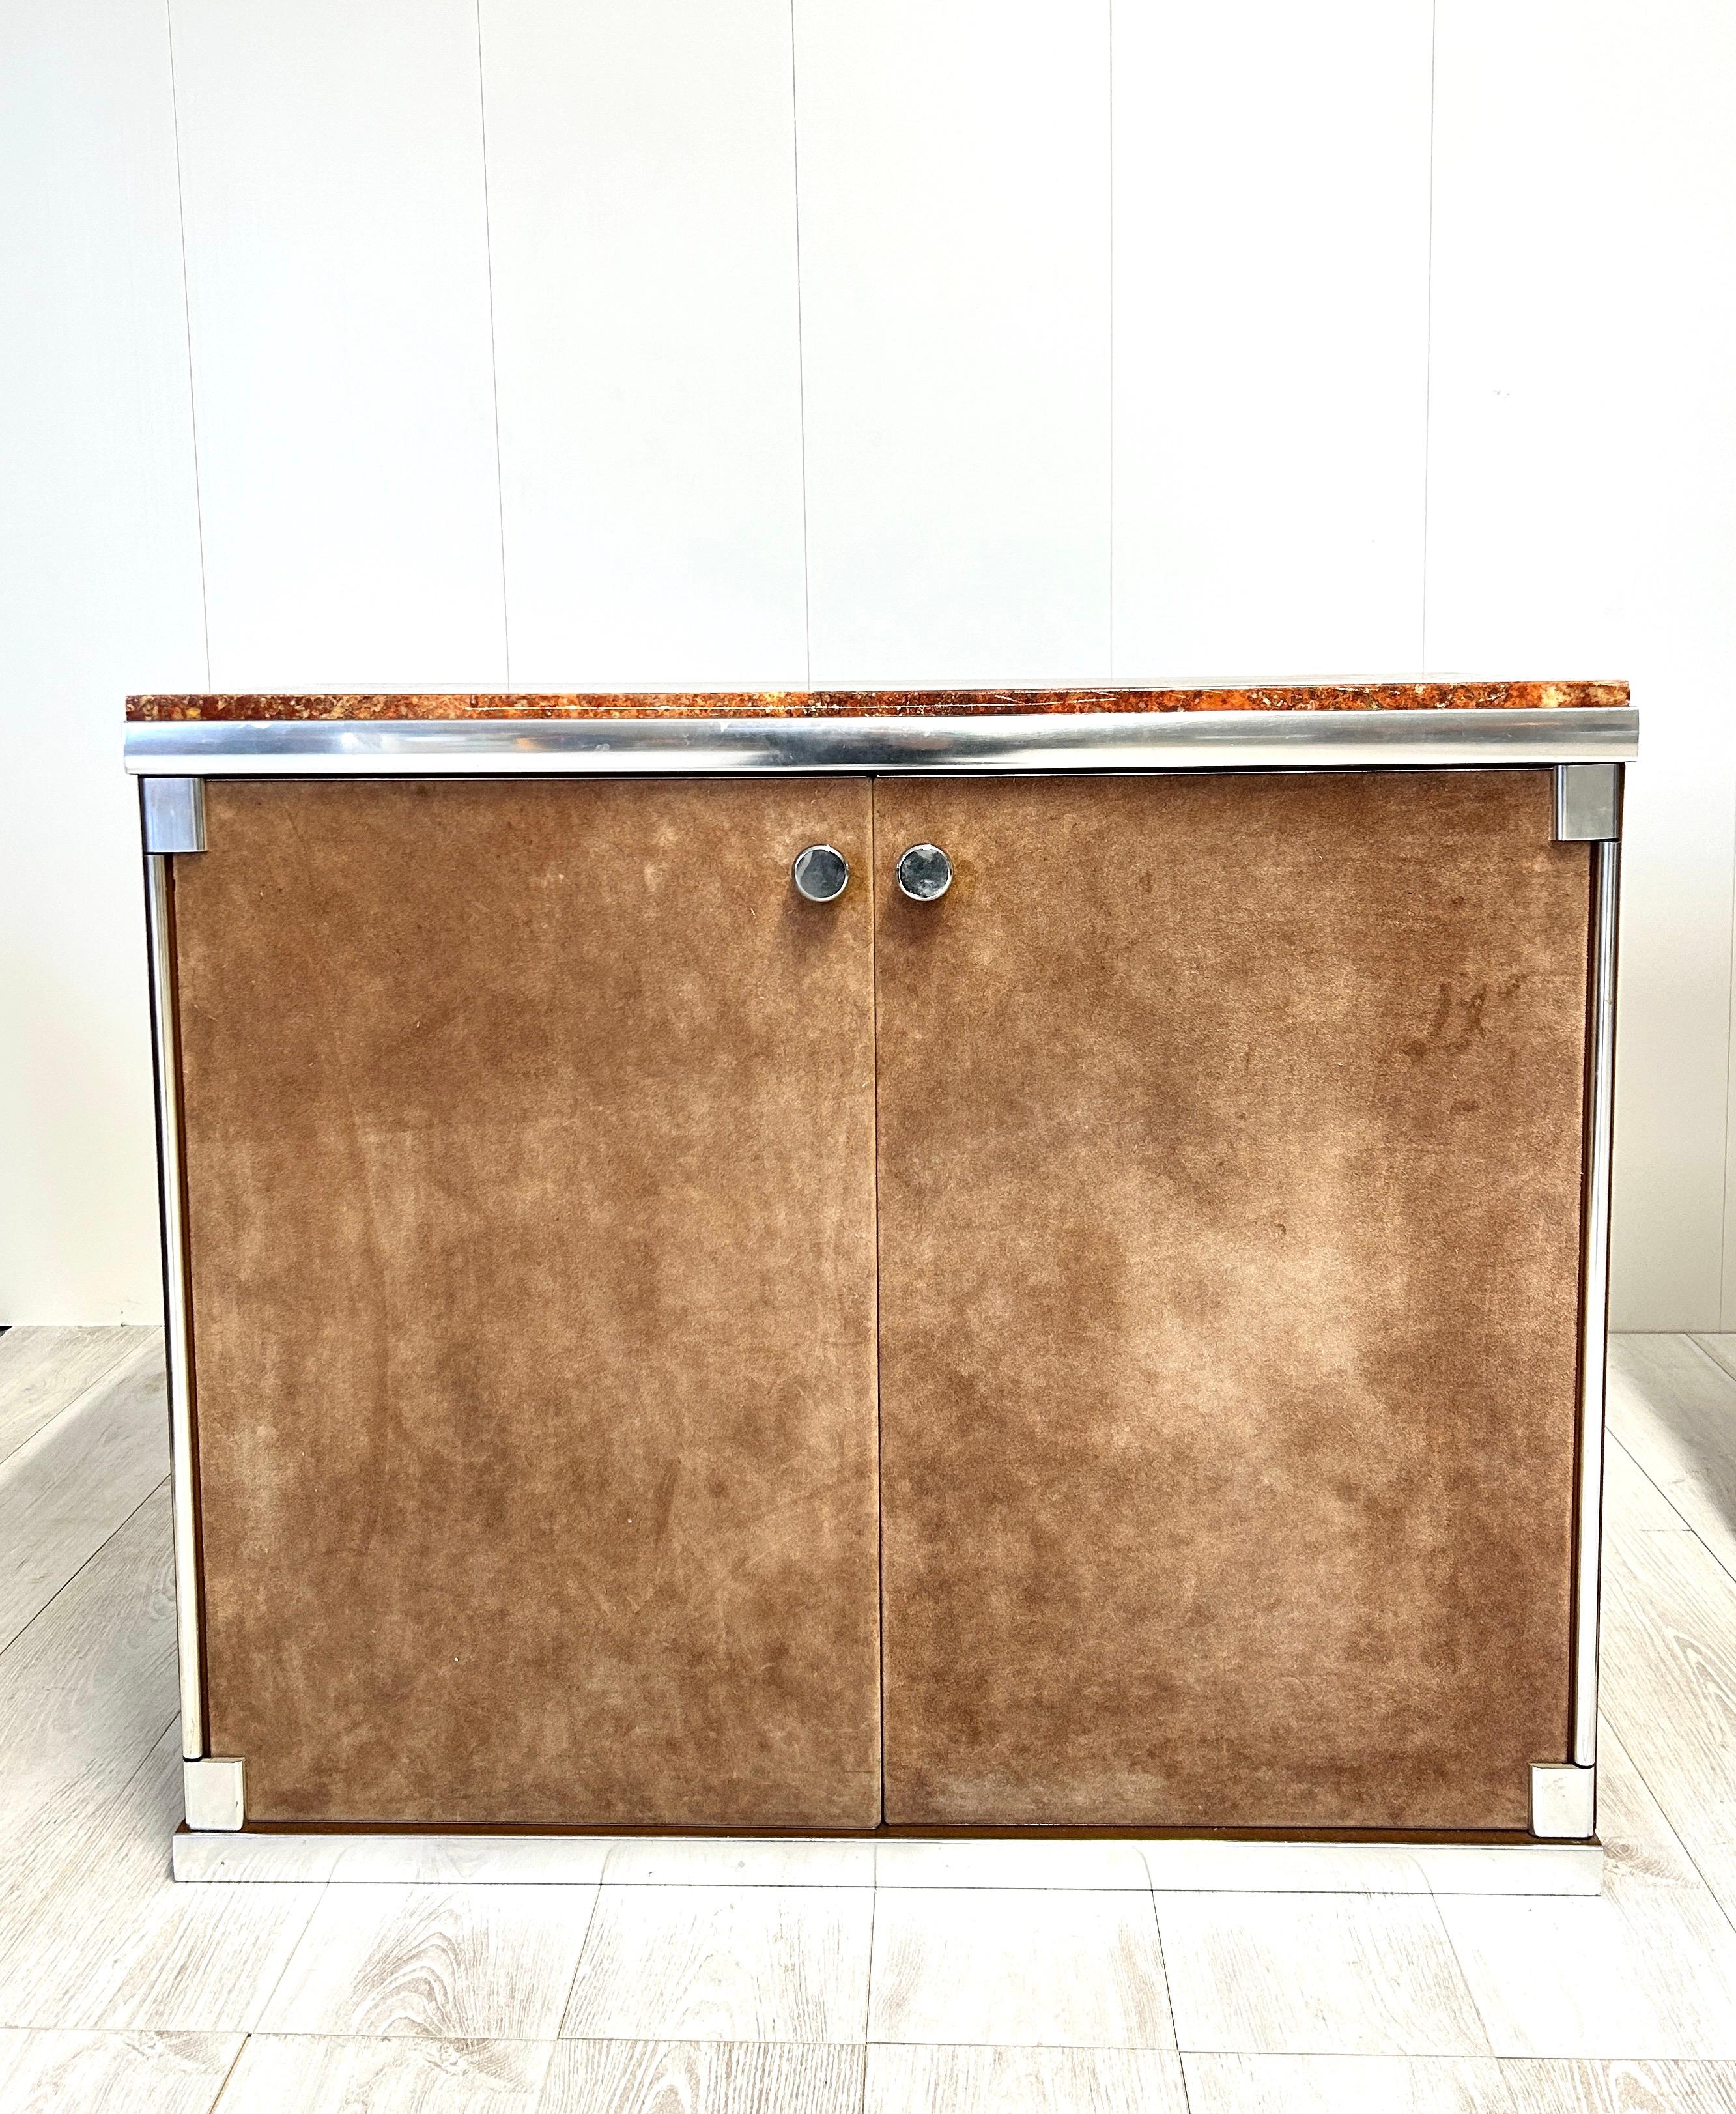 Modular sideboard by Guido Faleschini 1970s 
sideboard with drawers cm 84 x 150 x 46; sideboard with doors 84 x 100 x 46
Good vintage conditions, beautiful marble on the top.